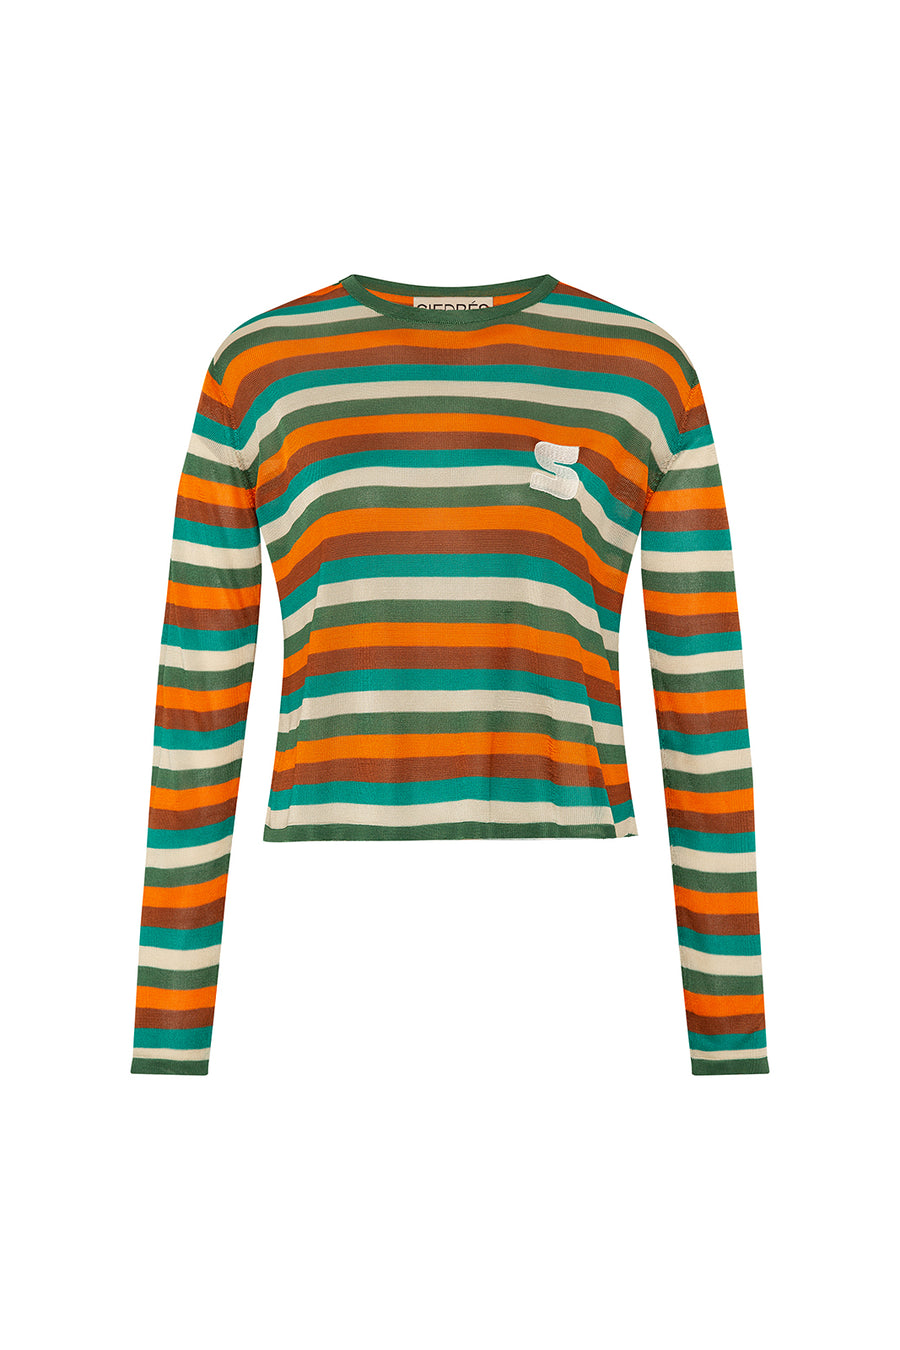 TEX - Sunset striped long sleeve knit top